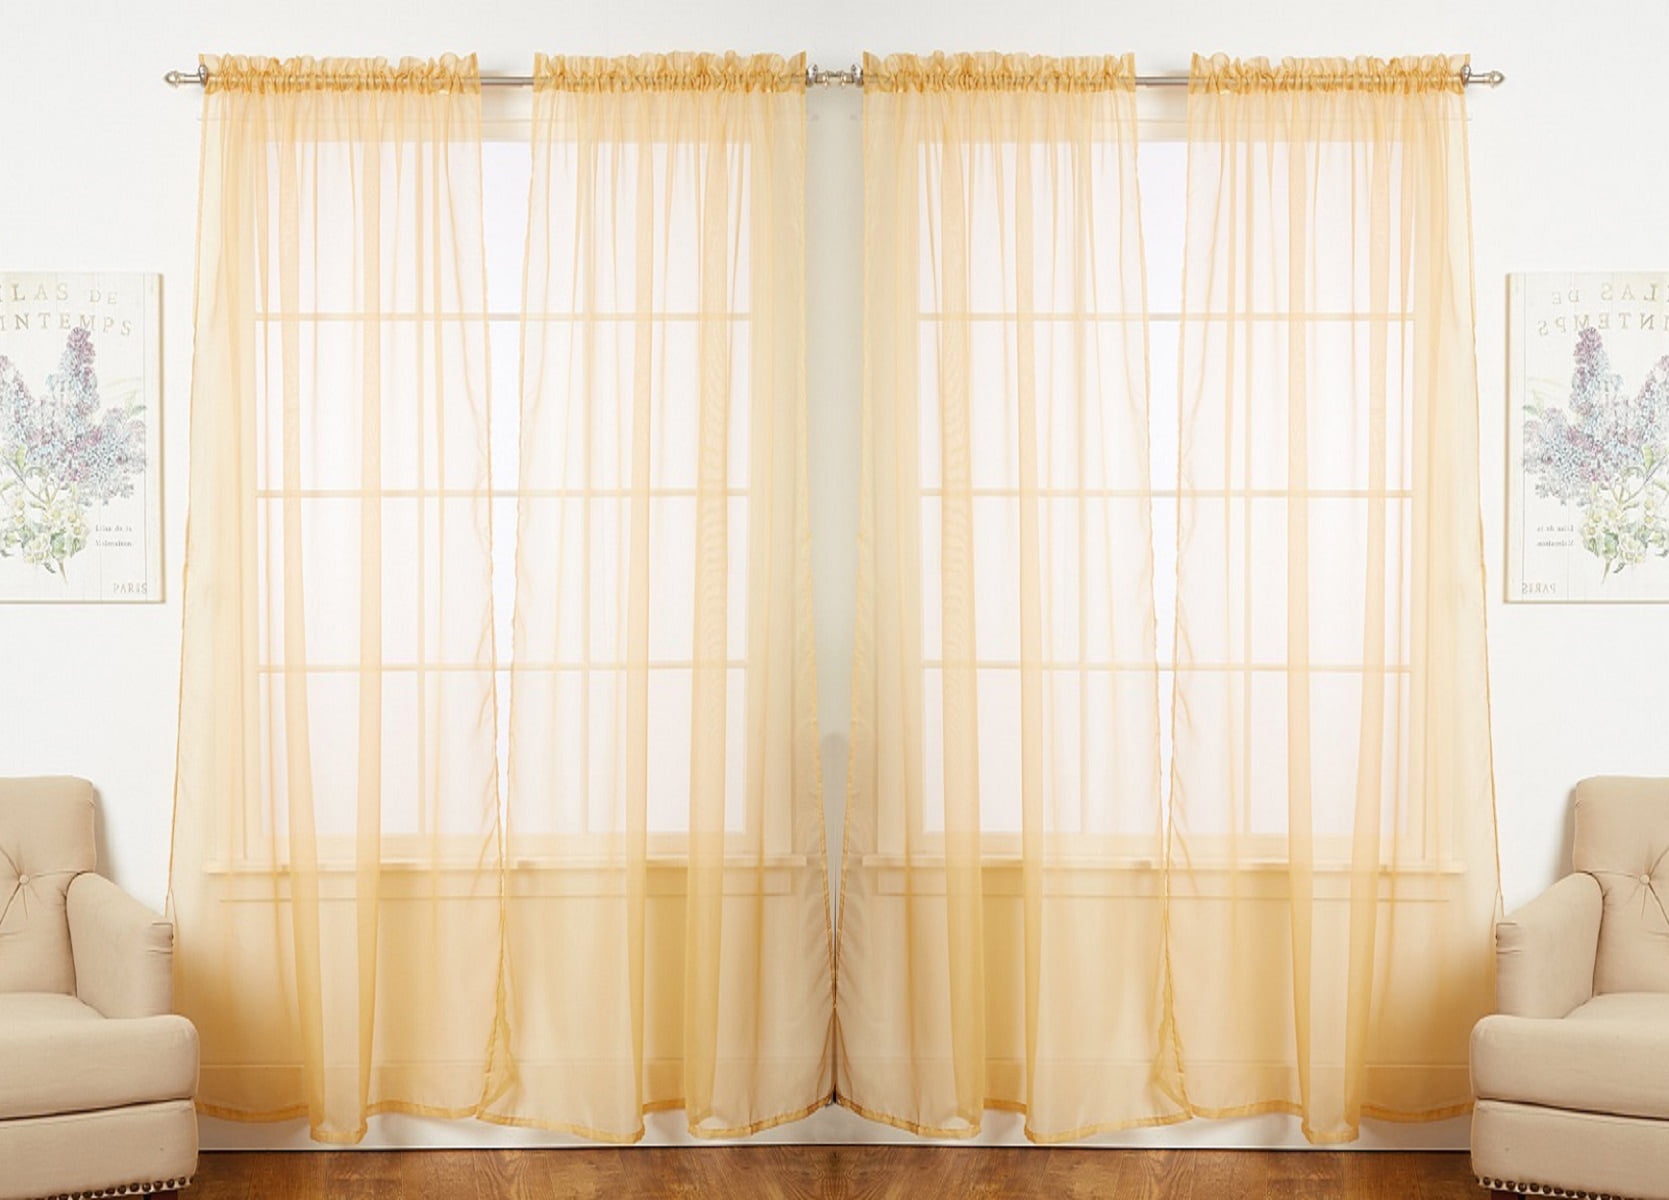 Window Drapes 55" X 84" polyester sheers Panels Set of 4 Sheer Voile Curtains 